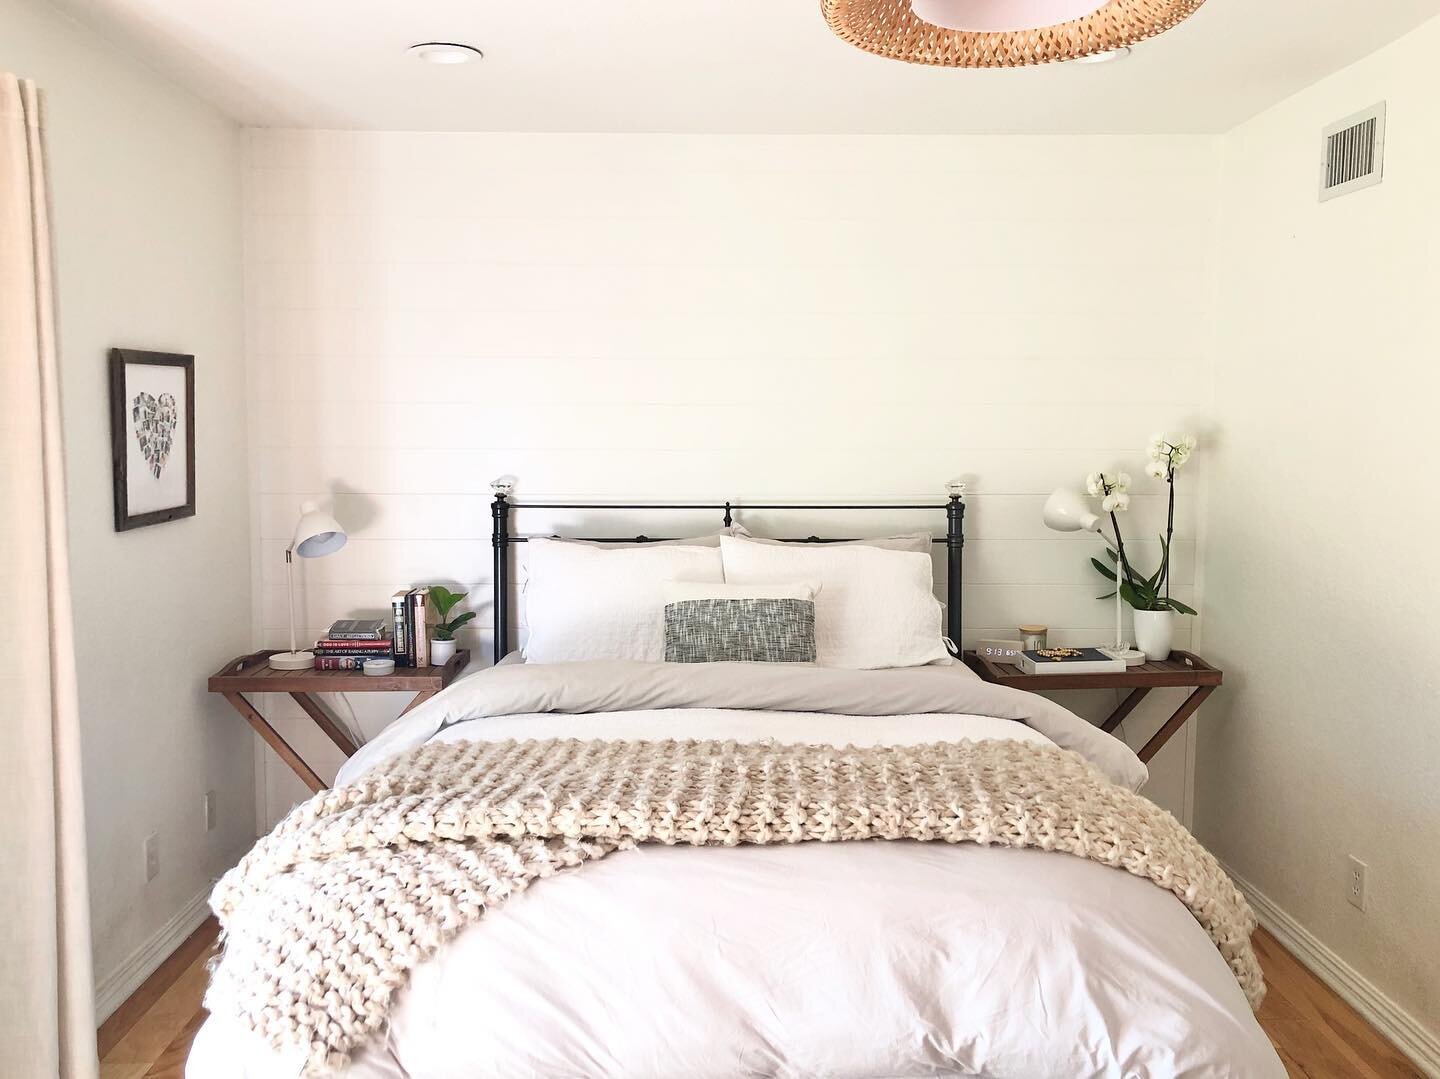 One of my 2021 intentions is to blog some of our tiny but might updates we made to our home in the last year++, starting with our master bedroom. With paint, shiplap and some beautiful new linens, this space has been transformed! Head to the blog for